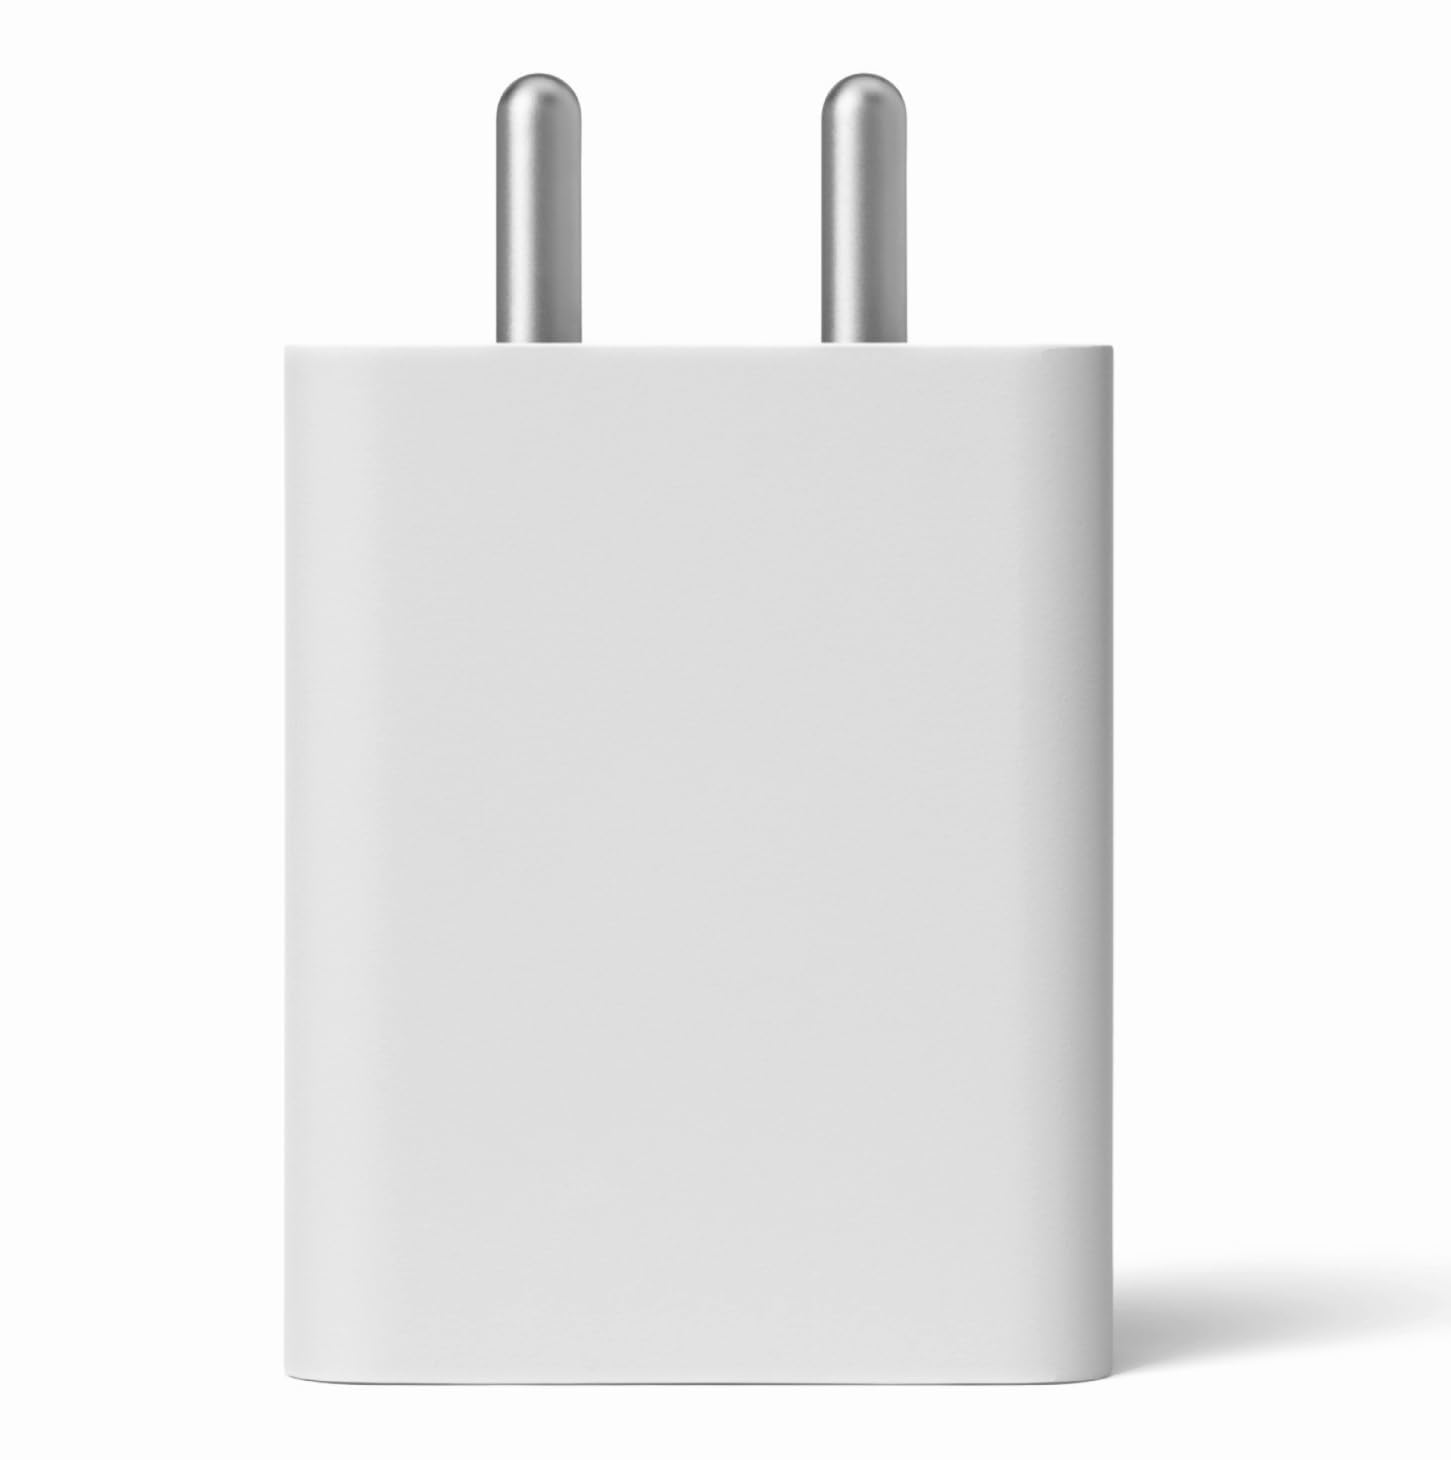 30W USB-C Charger Compatible with Google Pixel 7 Pro, Pixel 7, Pixel 7A, Pixel 6 Pro, Pixel 6, Pixel 6A & Other USB-C Devices - Fast Charge Pixel Phone Charger [Quick Charge Support] - 30 Watt, White